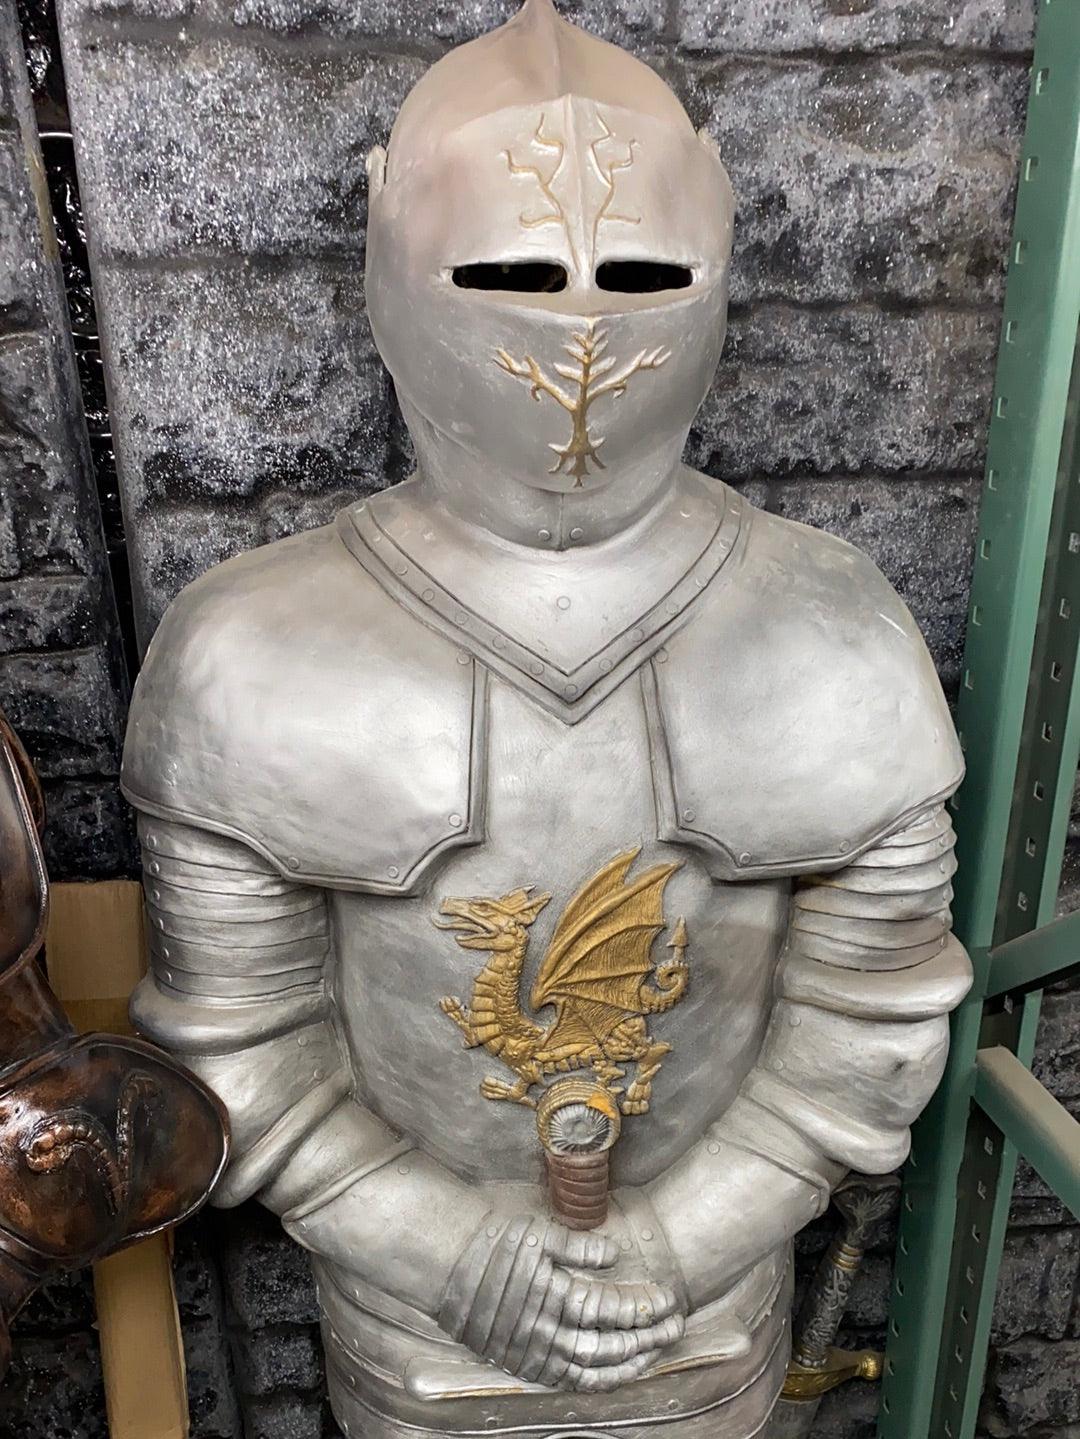 Knight Life Size Mythical Half Foam Prop Decor Resin Statue